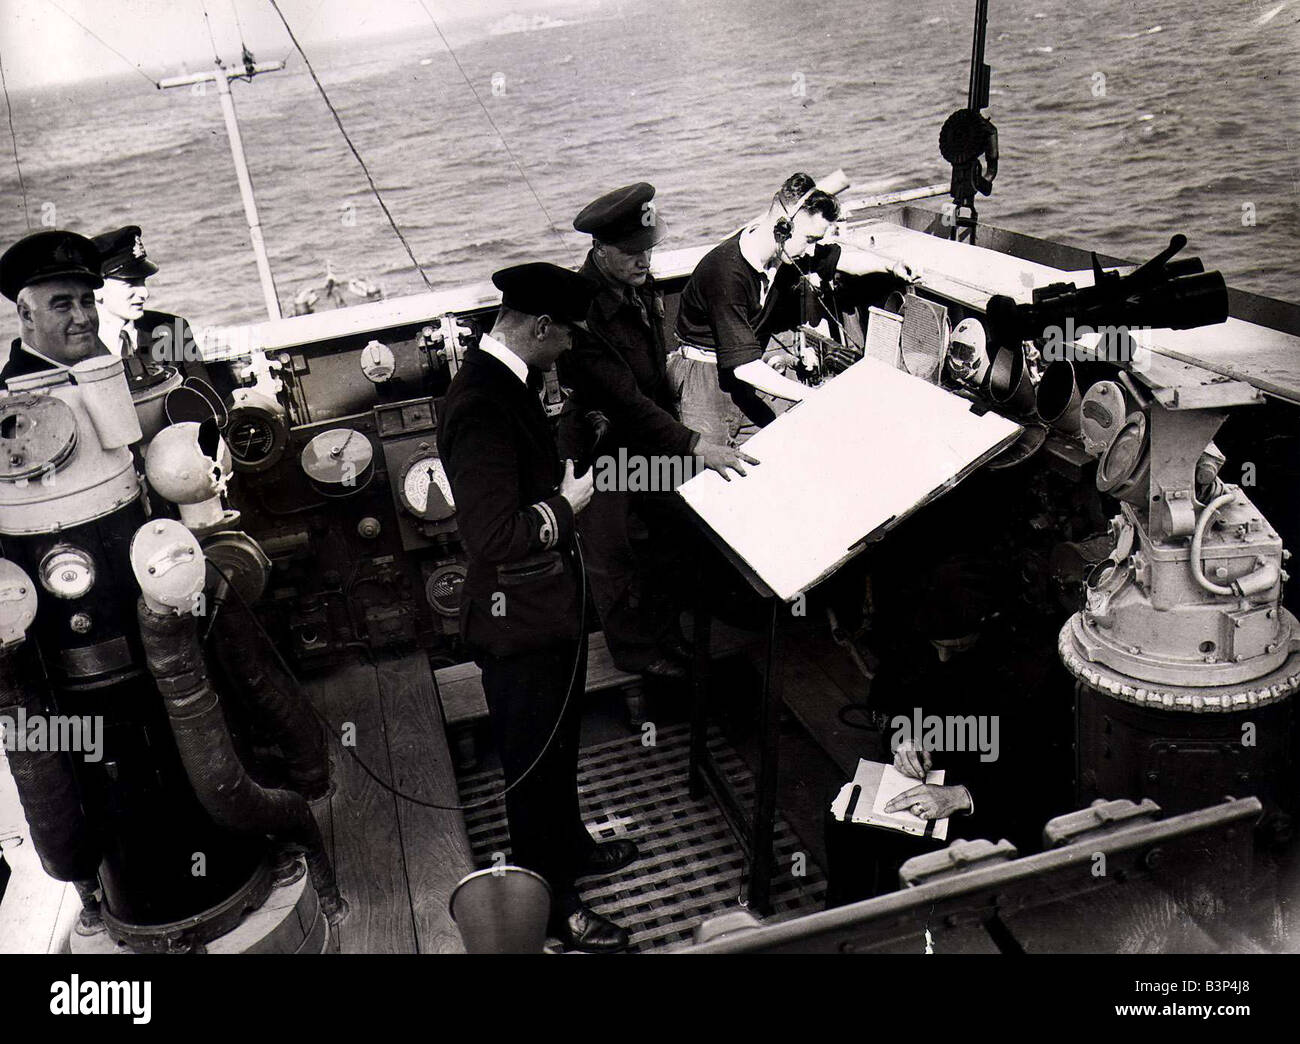 World War II Invasion of France Army artillery officer working with a Royal Navy gunner officer plot the next barrage on enemy postions in Normandy The guns of the Royal Navy s crusiers and battleships help subdue enemy fire during the first few weeks of Operation Overlord Sailors consulting a map one officer holding a telephone June 1944 Stock Photo